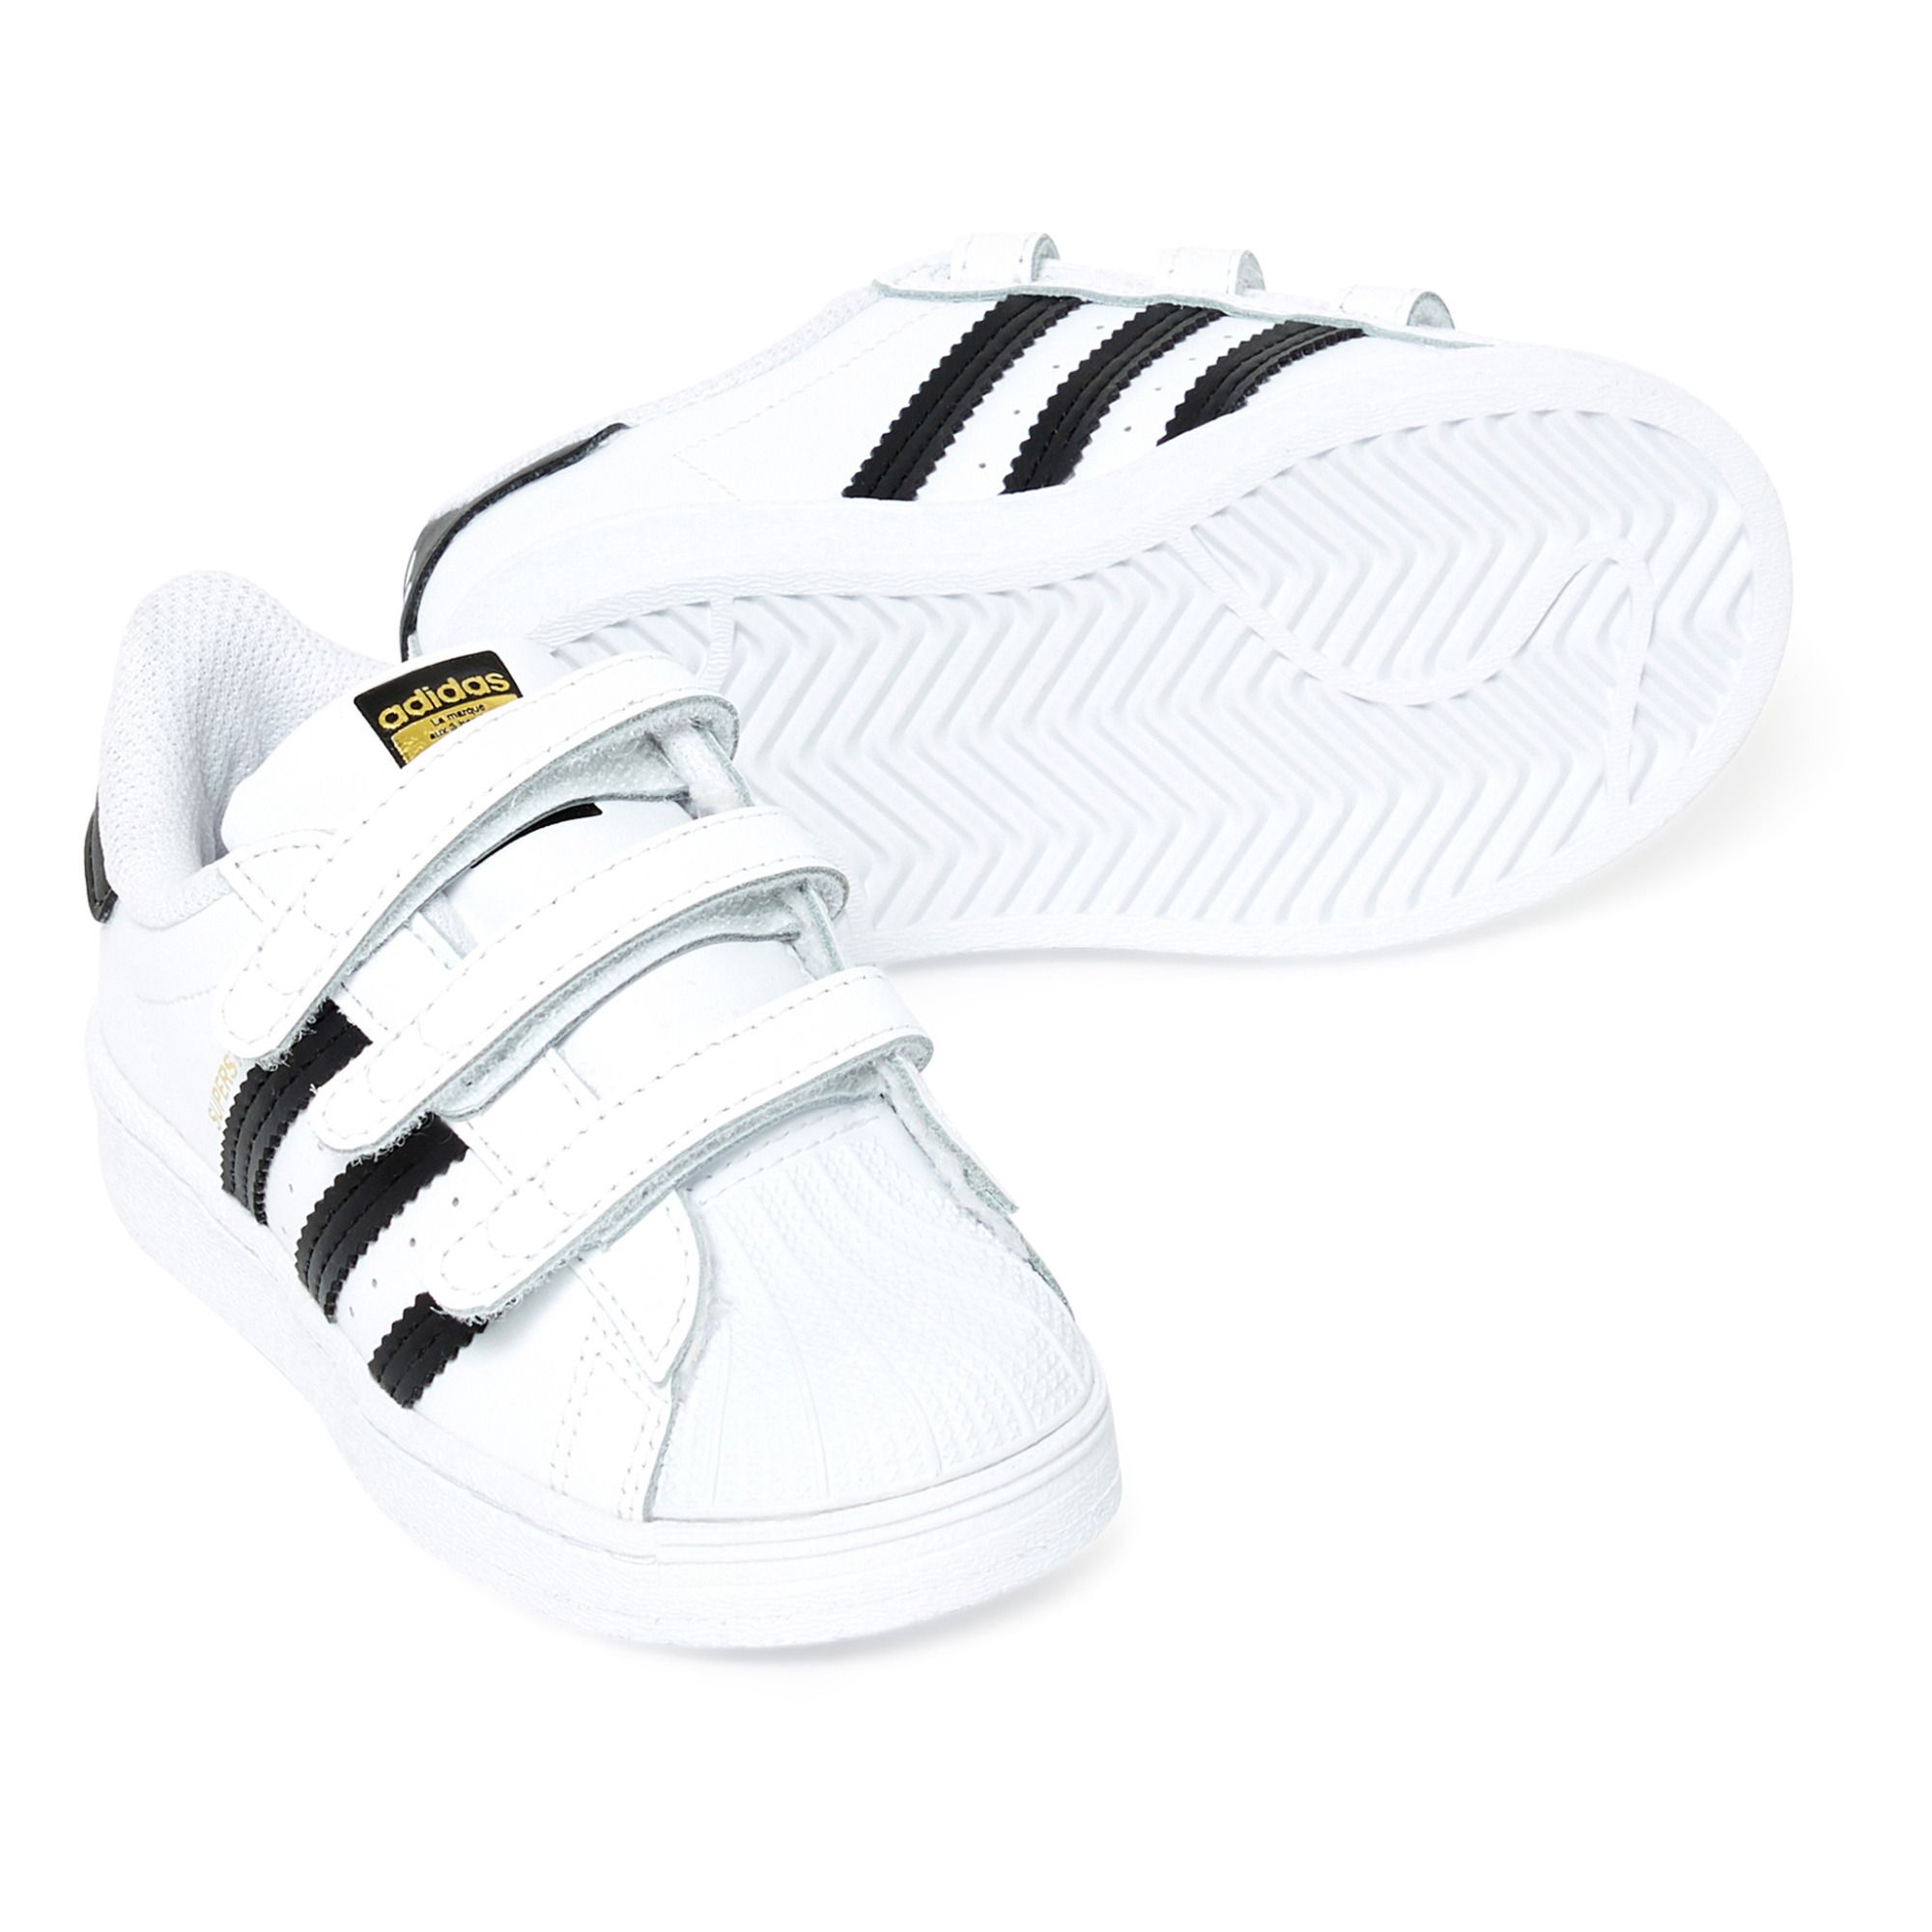 Adidas - Superstar 3 velcro Sneakers | Smallable